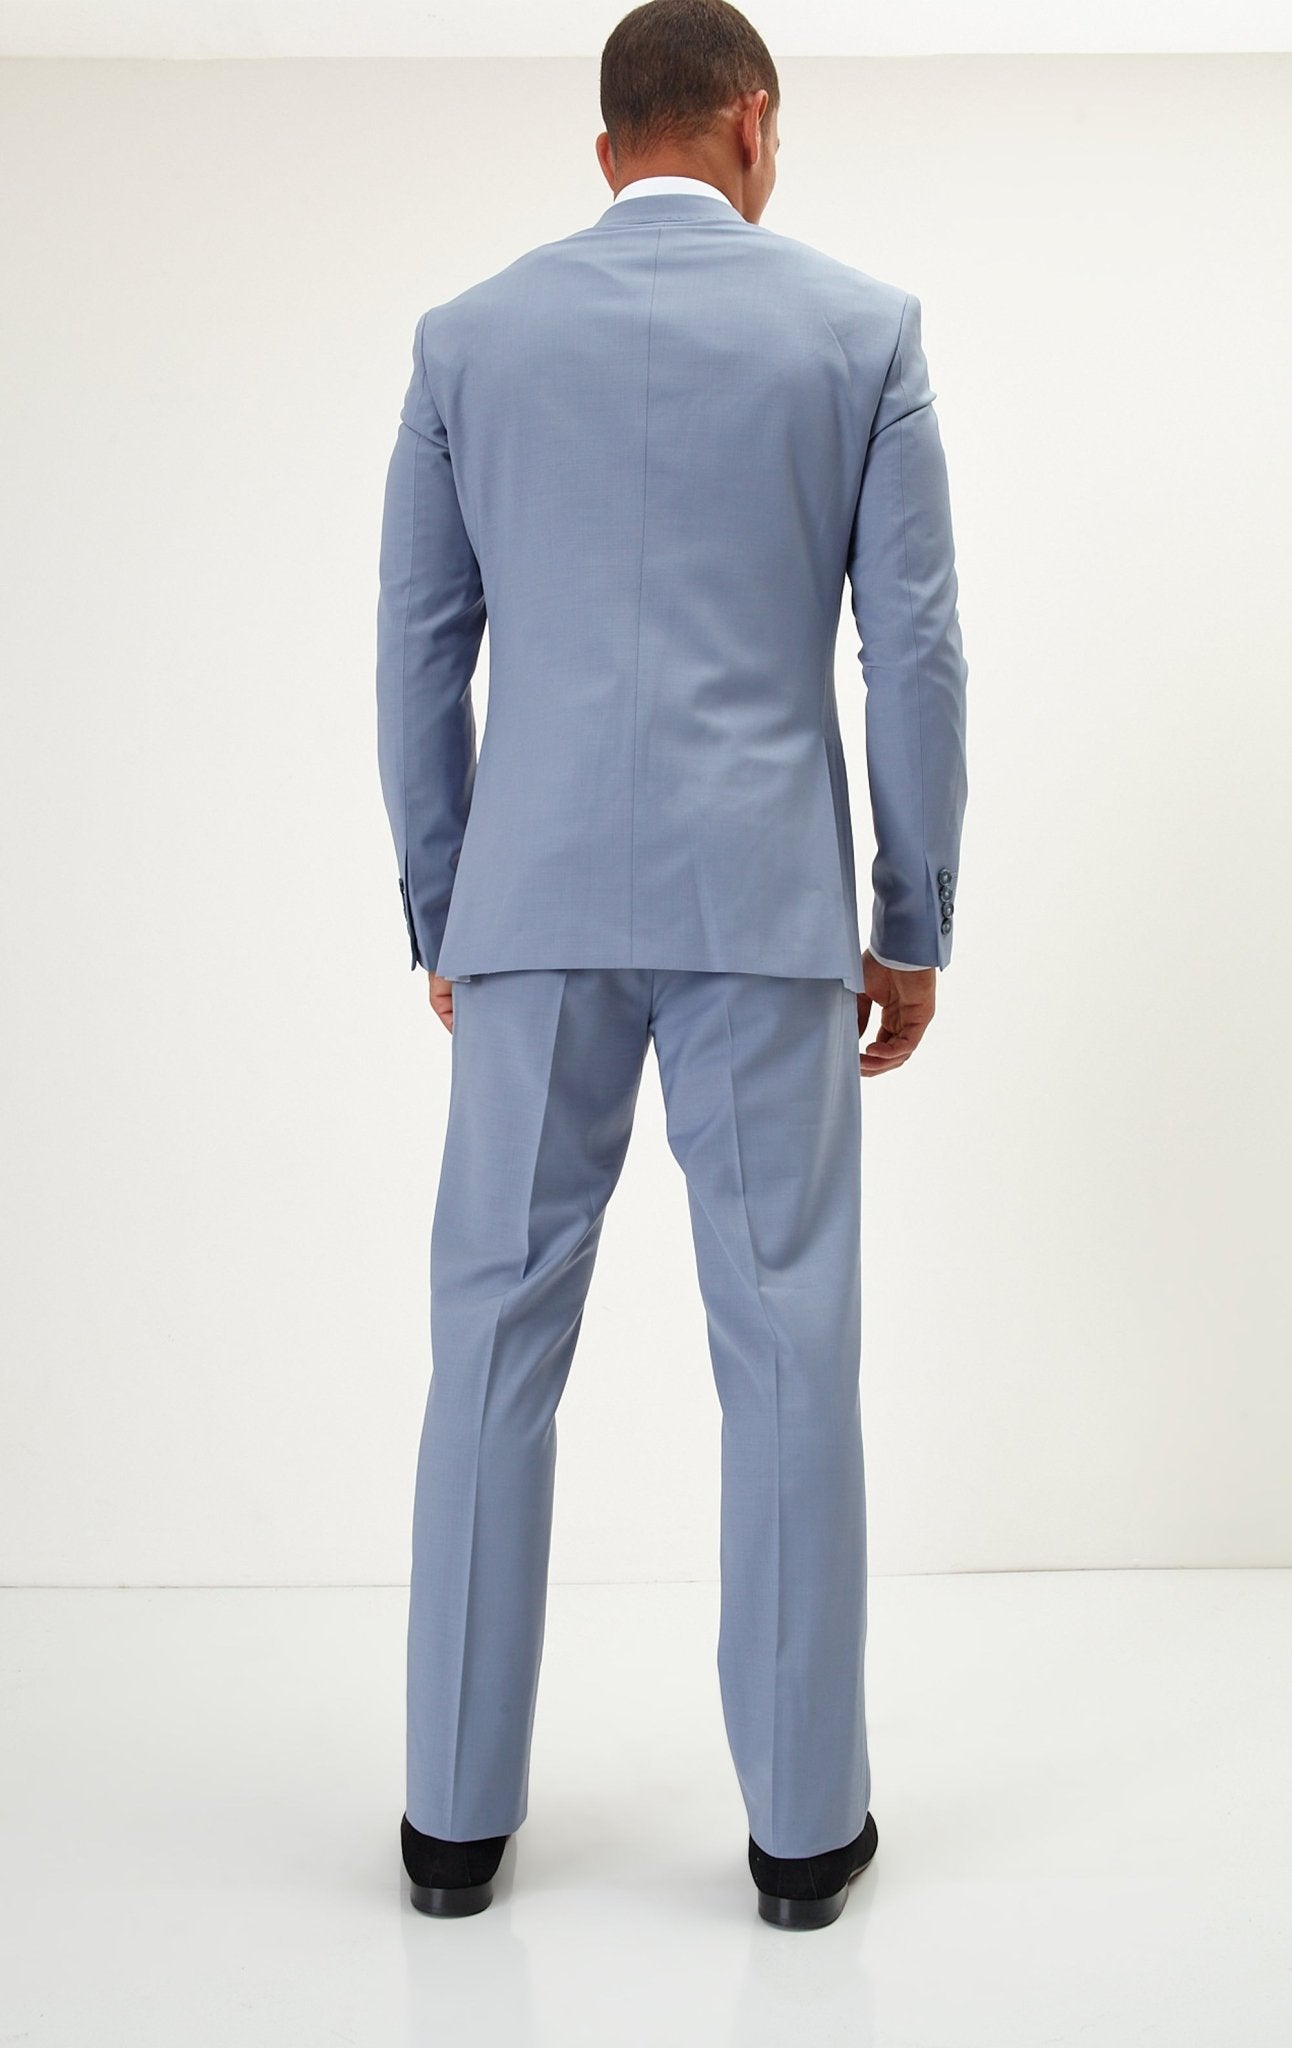 Super 120S Merino Wool Double Breasted Suit - Monument Grey Ish Blue - Ron Tomson